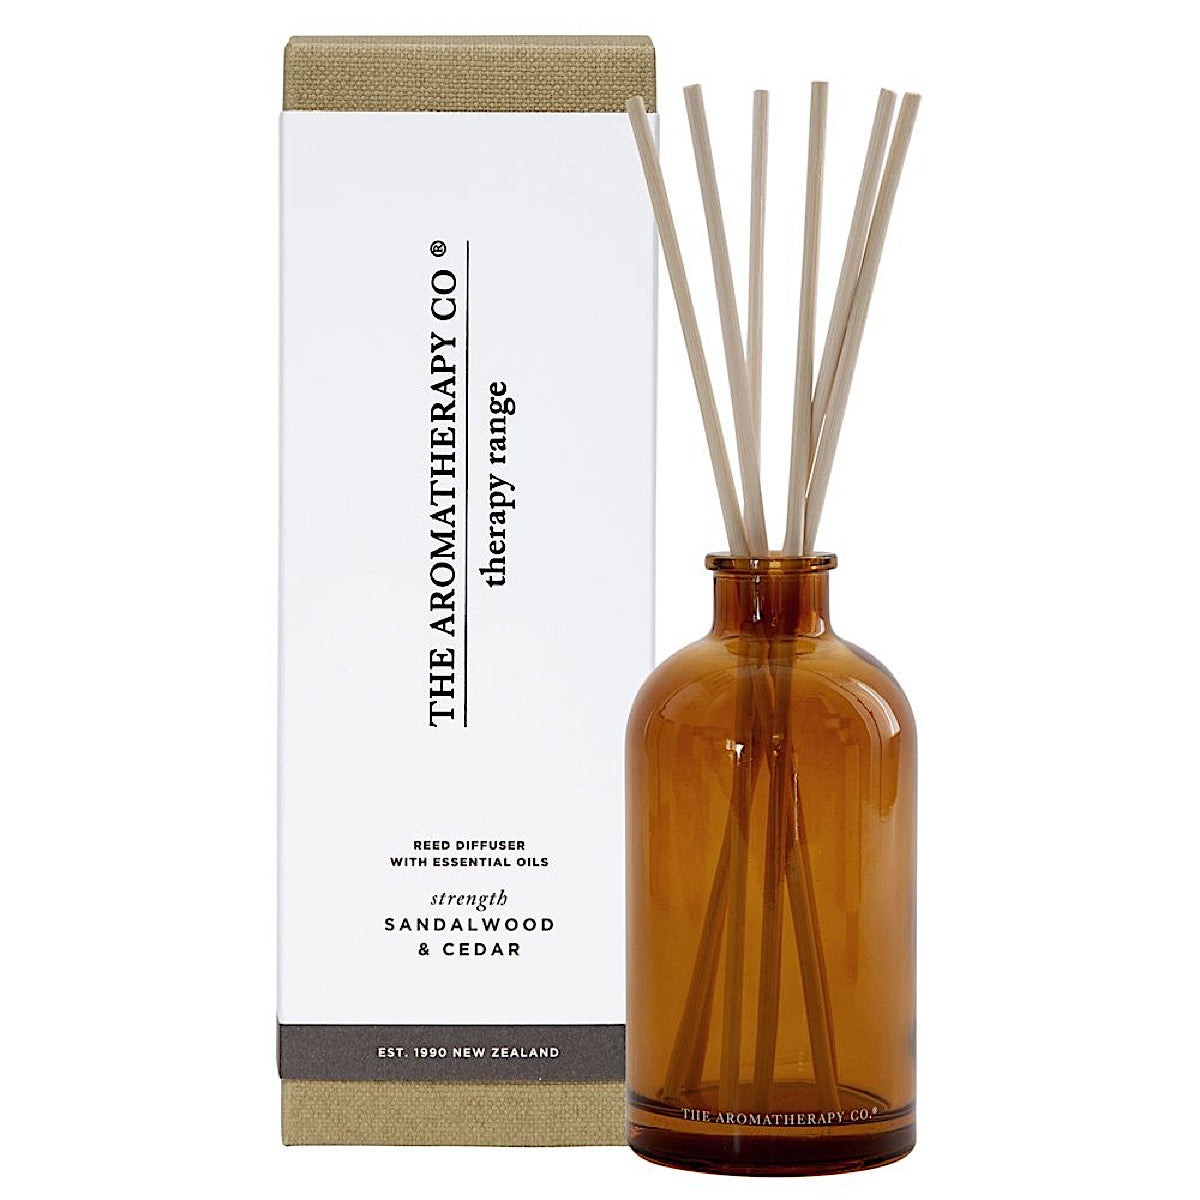 The Aromatherapy Co The Aromatherapy Co Therapy Range Strength Sandalwood & Cedar Reed Diffuser at More Than Just A Gift